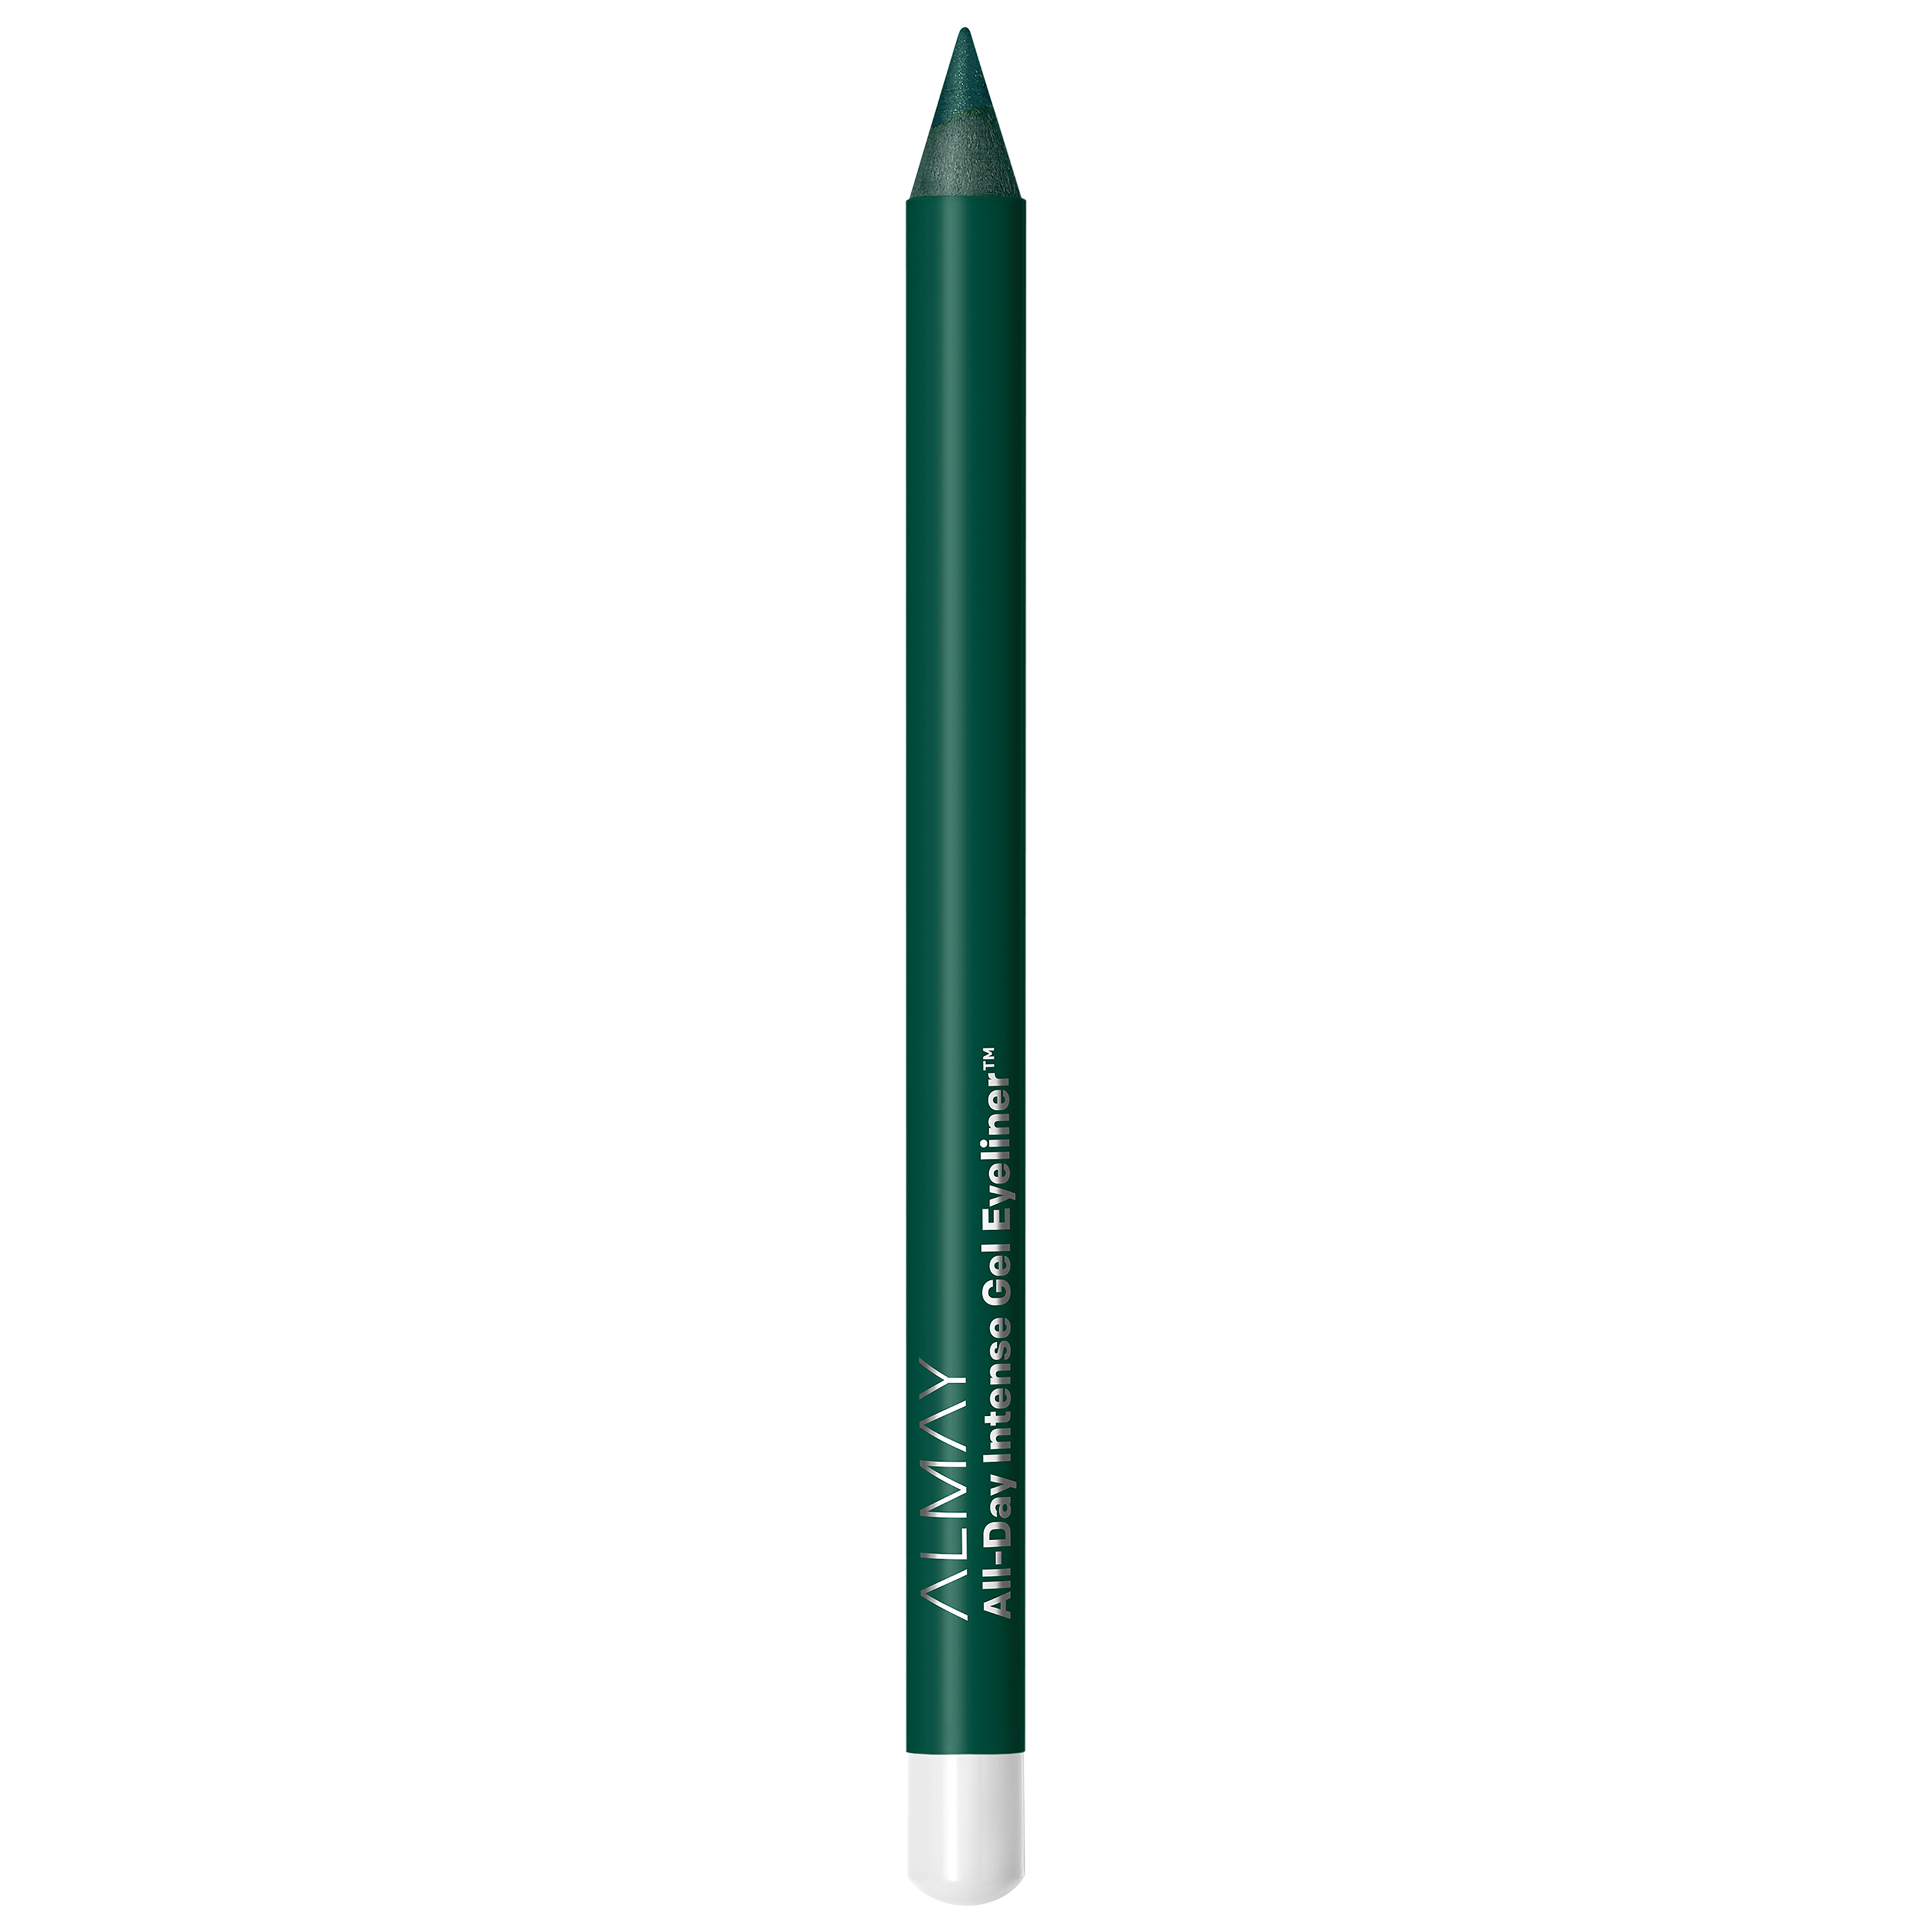 Almay All-Day Intense Gel Eyeliner, Longlasting, Waterproof, Fade-Proof Creamy High-Performing Easy-to-Sharpen Liner Pencil, 150 Evergreen, 0.028 oz. - image 1 of 17